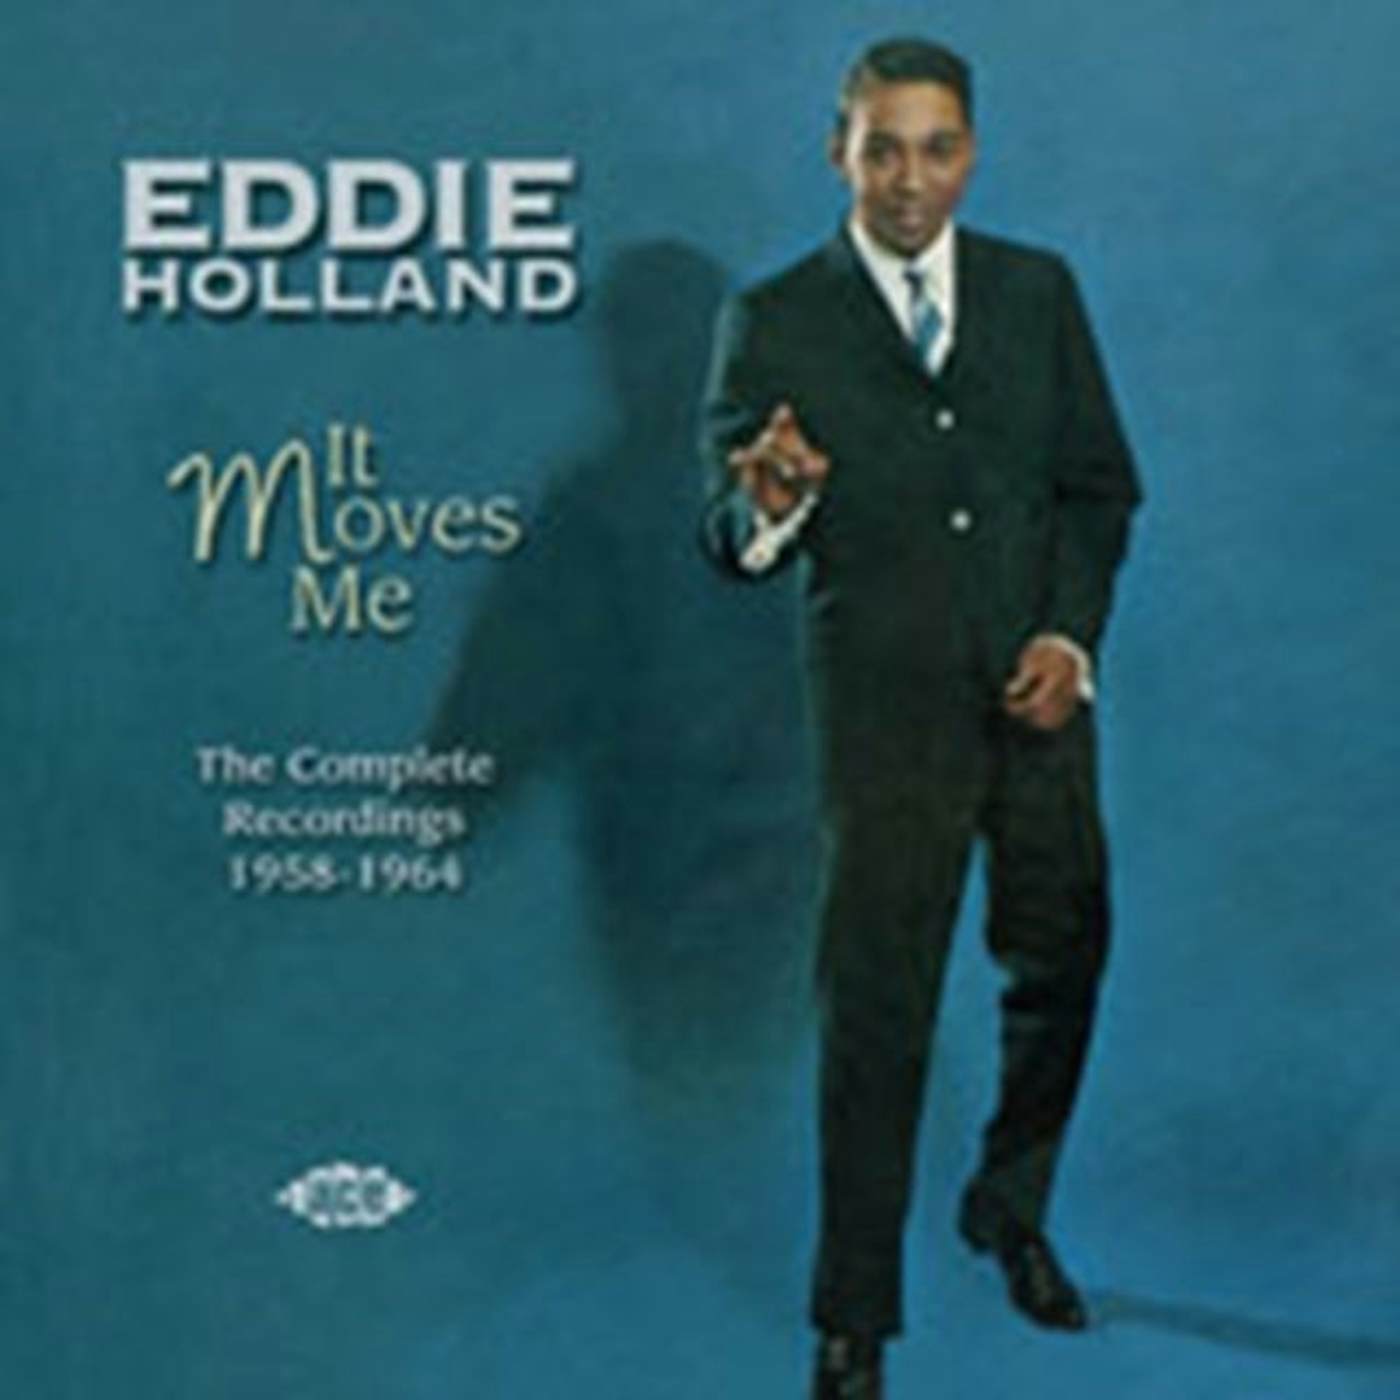 Eddie Holland CD - It Moves Me - The Complete Recordings 19 58 - 19 64